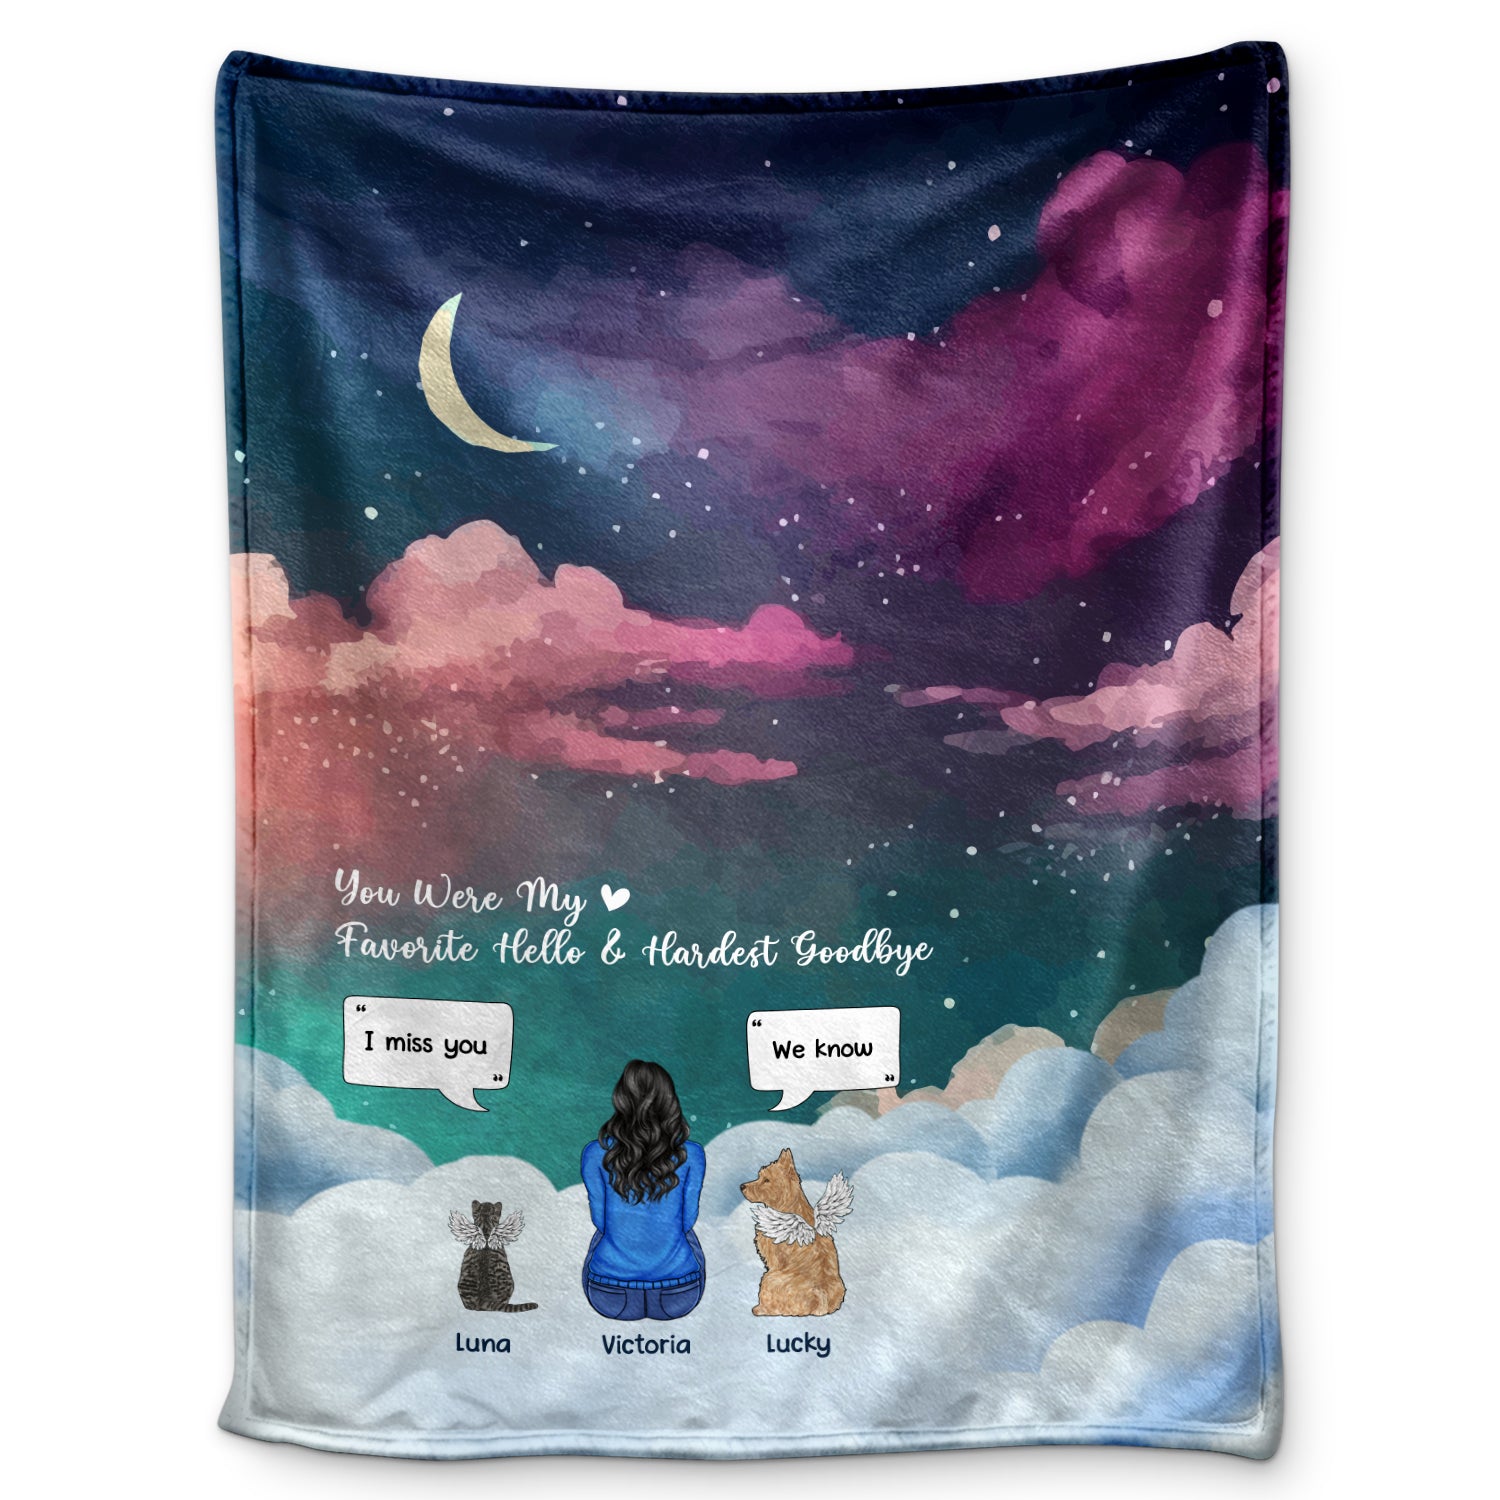 You Were My Favorite Hello And Hardest Goodbye - Memorial Gift - Personalized Fleece Blanket